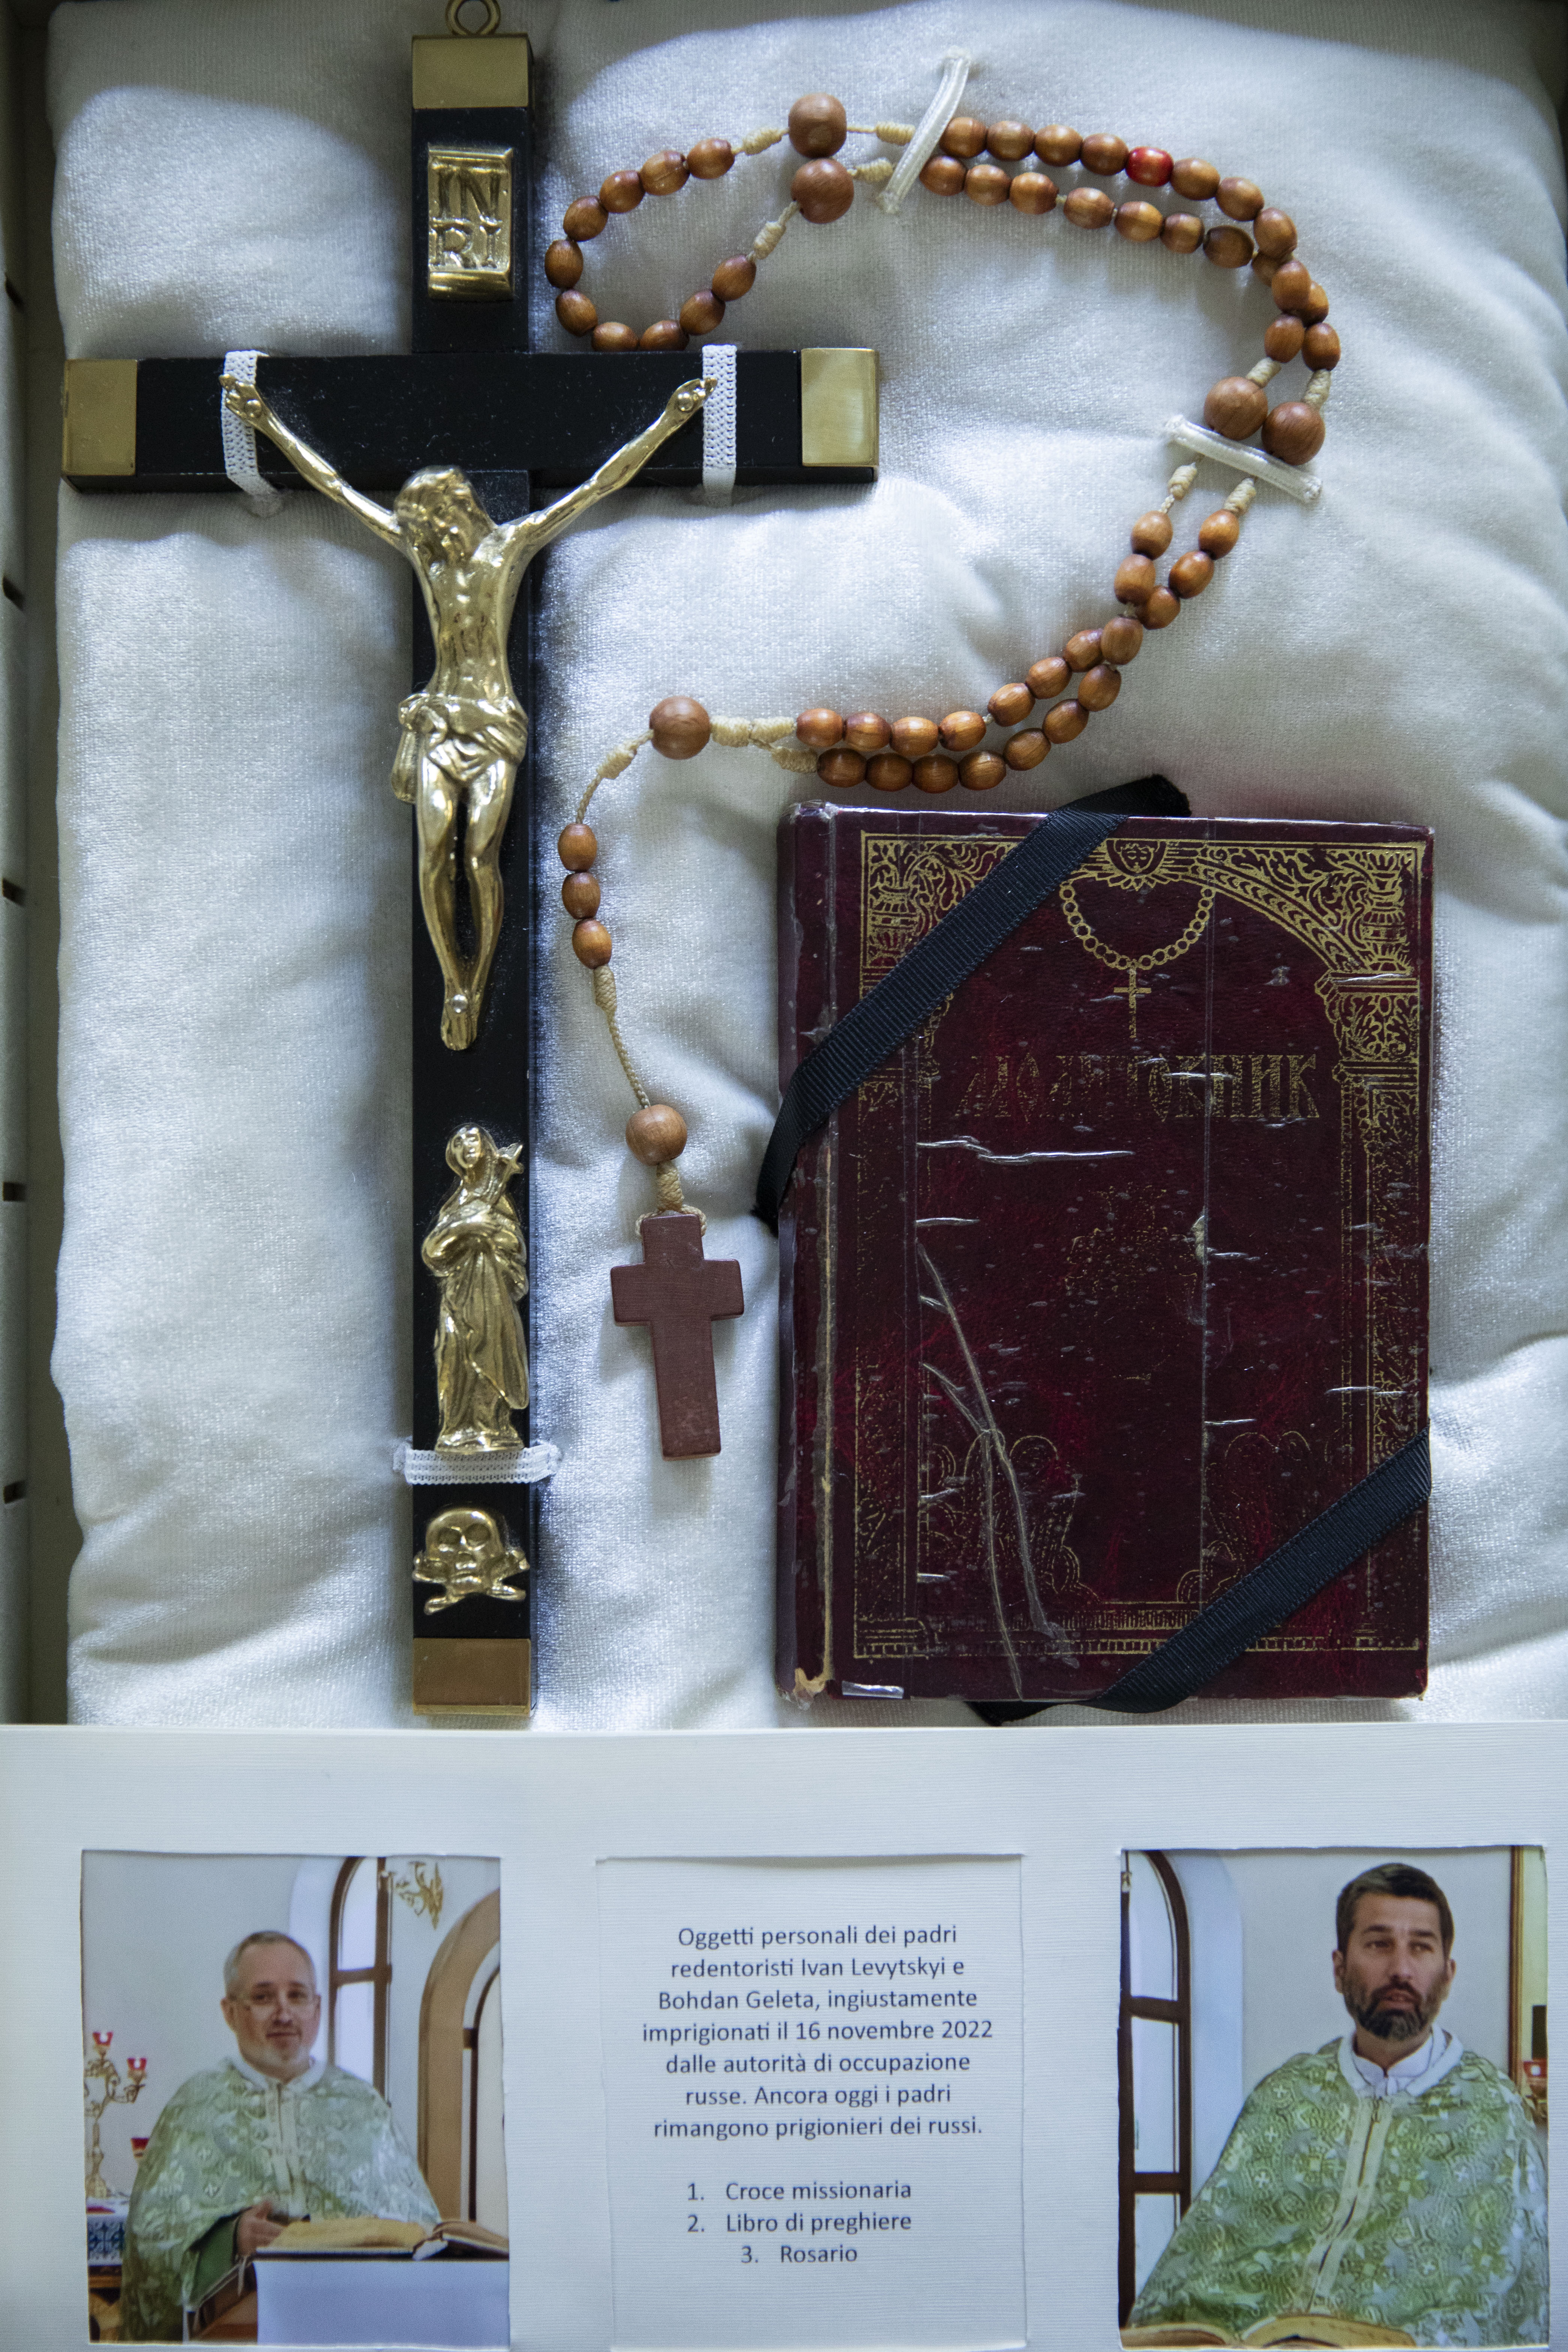 Gifts given to the pope by Ukrainian bishops.